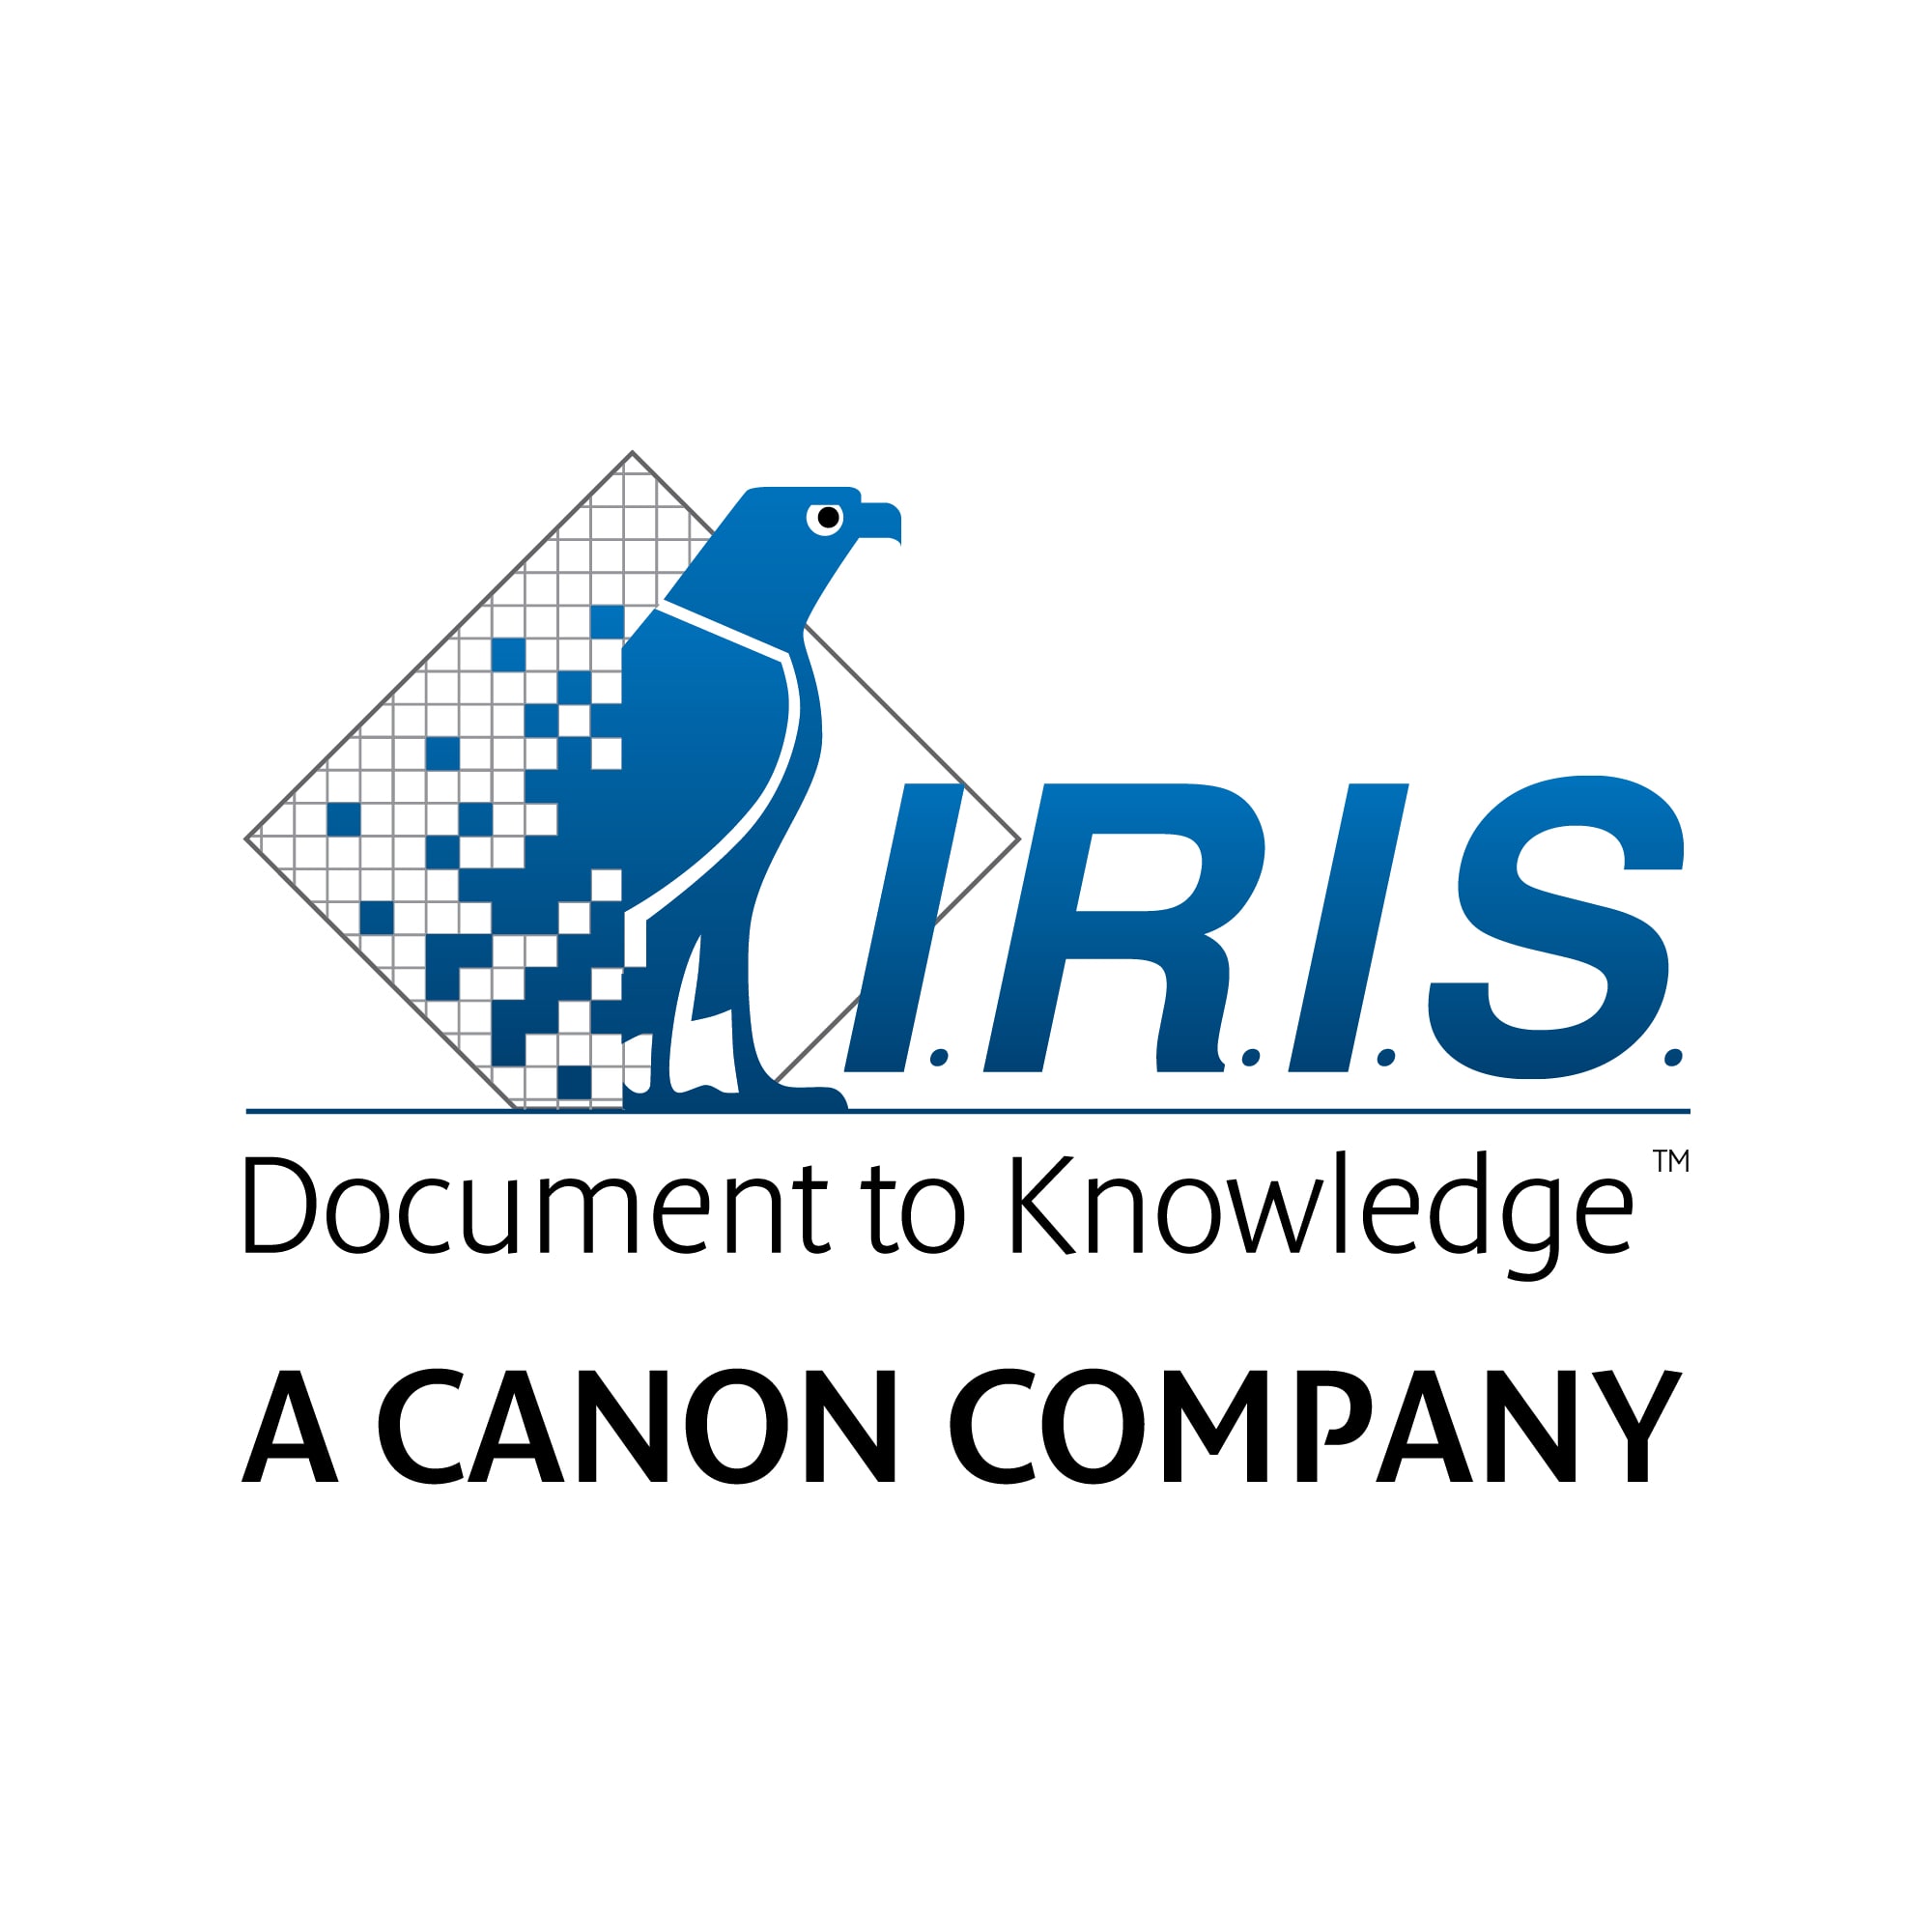 I.R.I.S. IRIScan Book 5 Wi-Fi Portable Scanner Specifications and